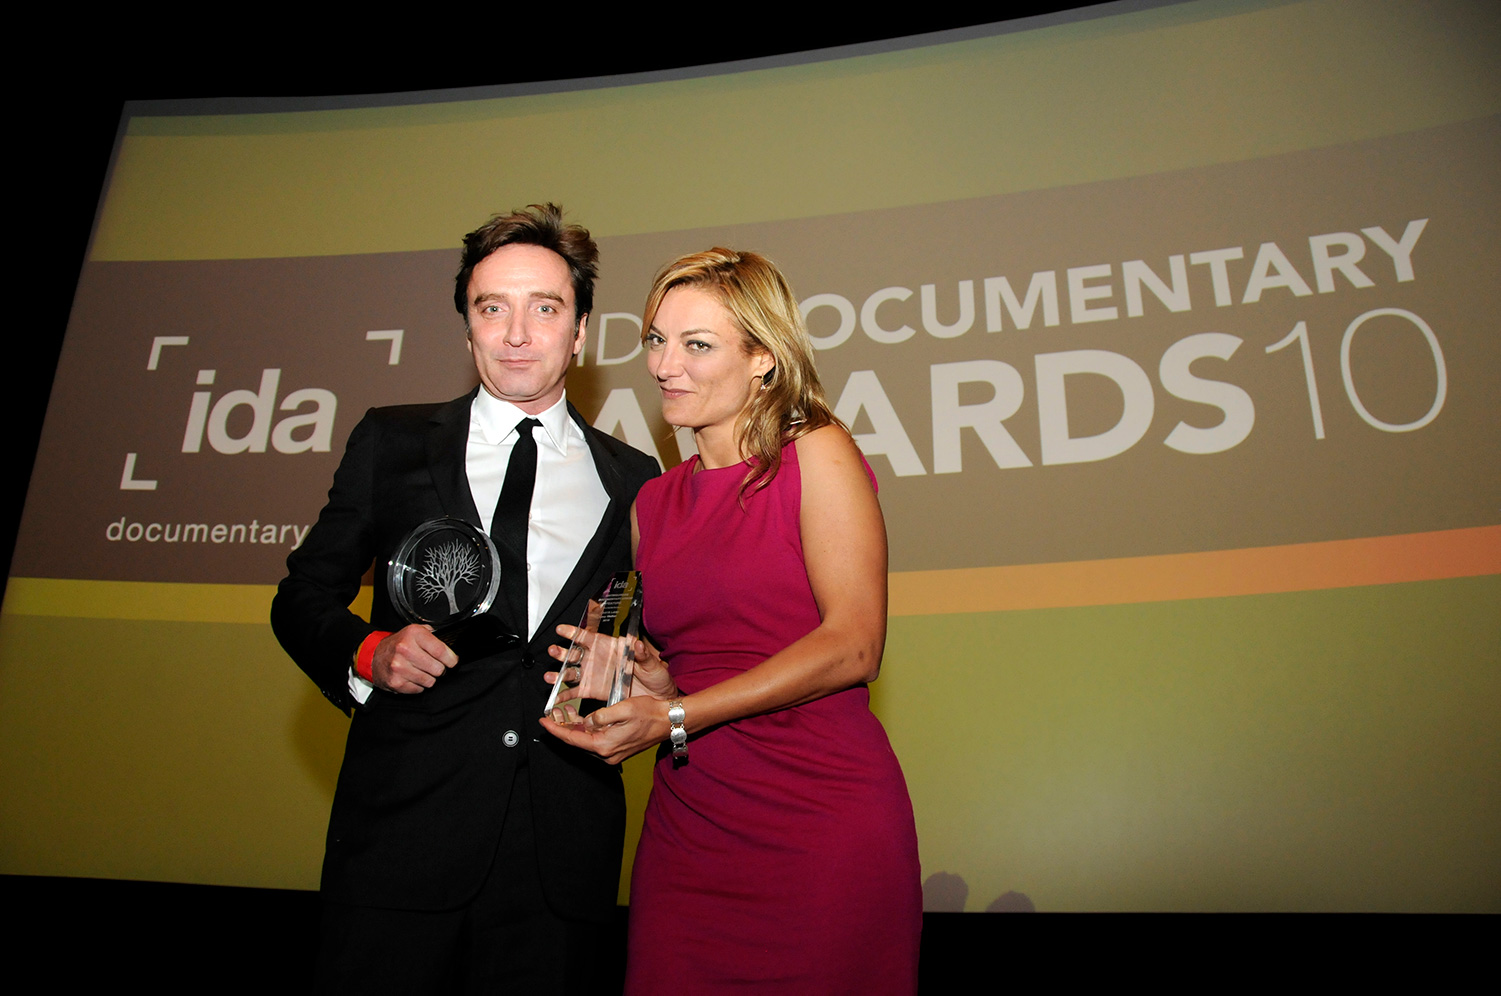 Filmmaker Lucy Walker and Producer Angus Aynsley accept the Pare Lorentz Award for 'Waste Land' at the 2010 Documentary Awards